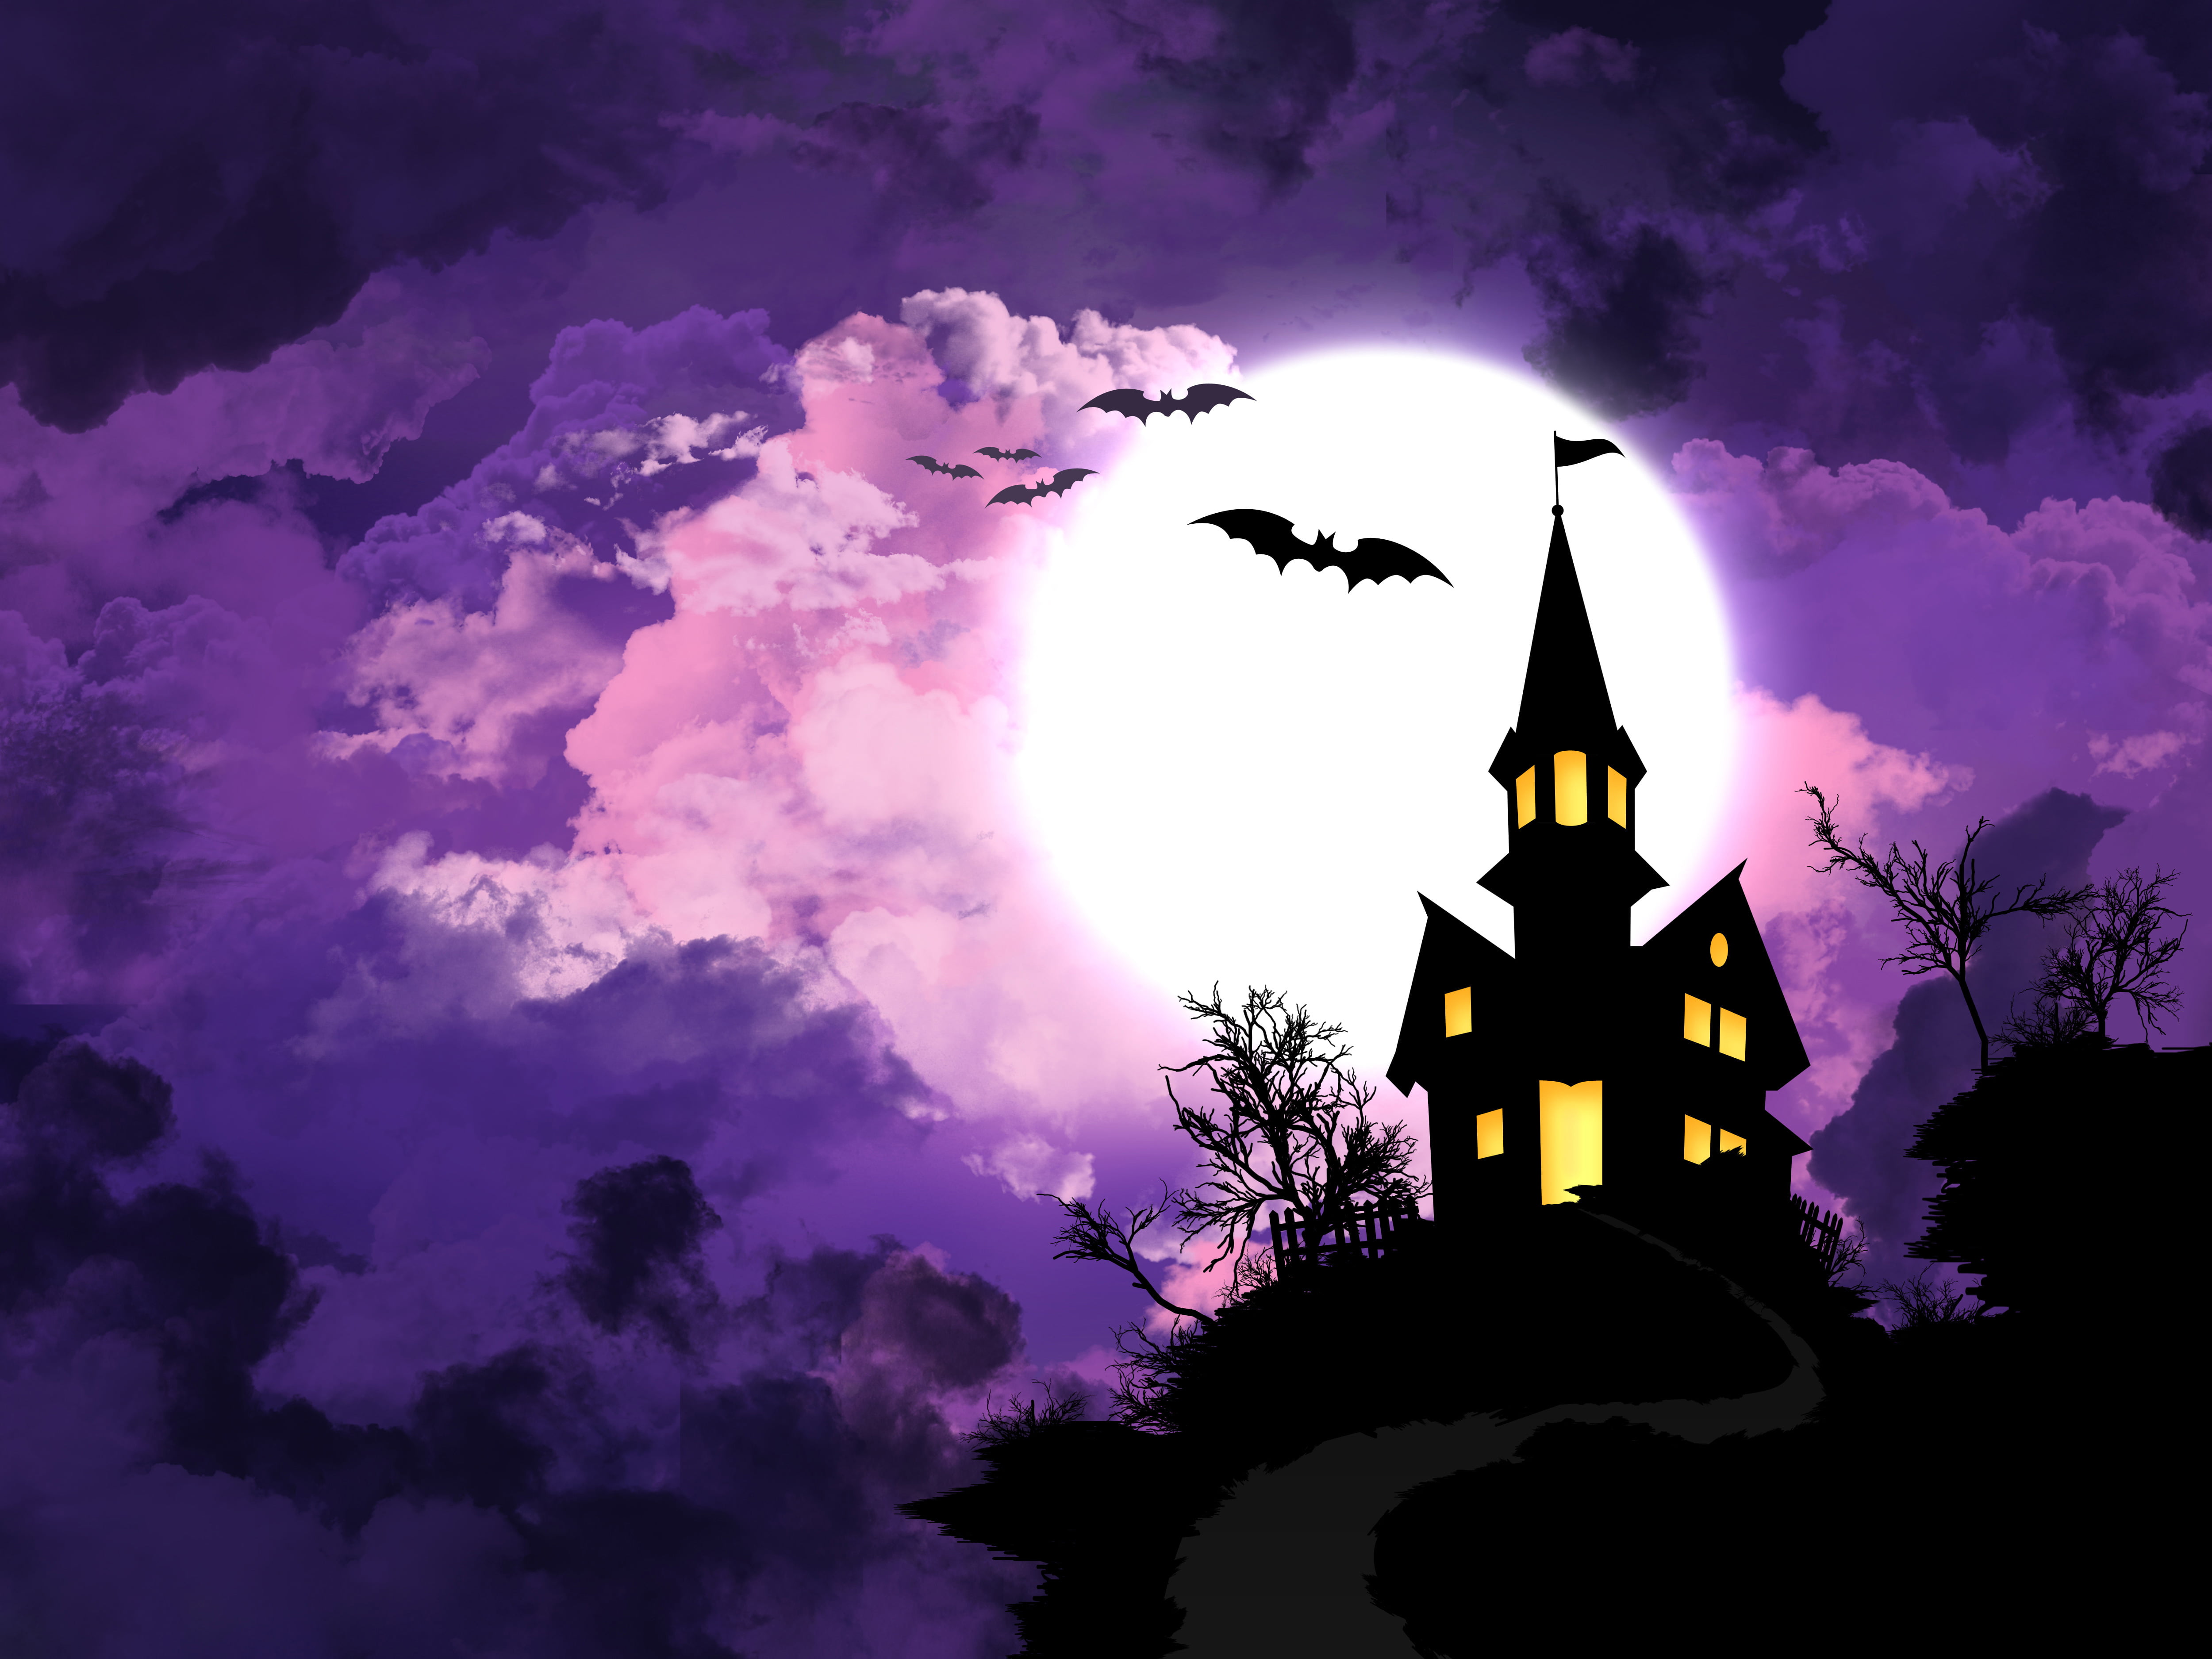 silhouette of castle on moon with bats flying graphic poster